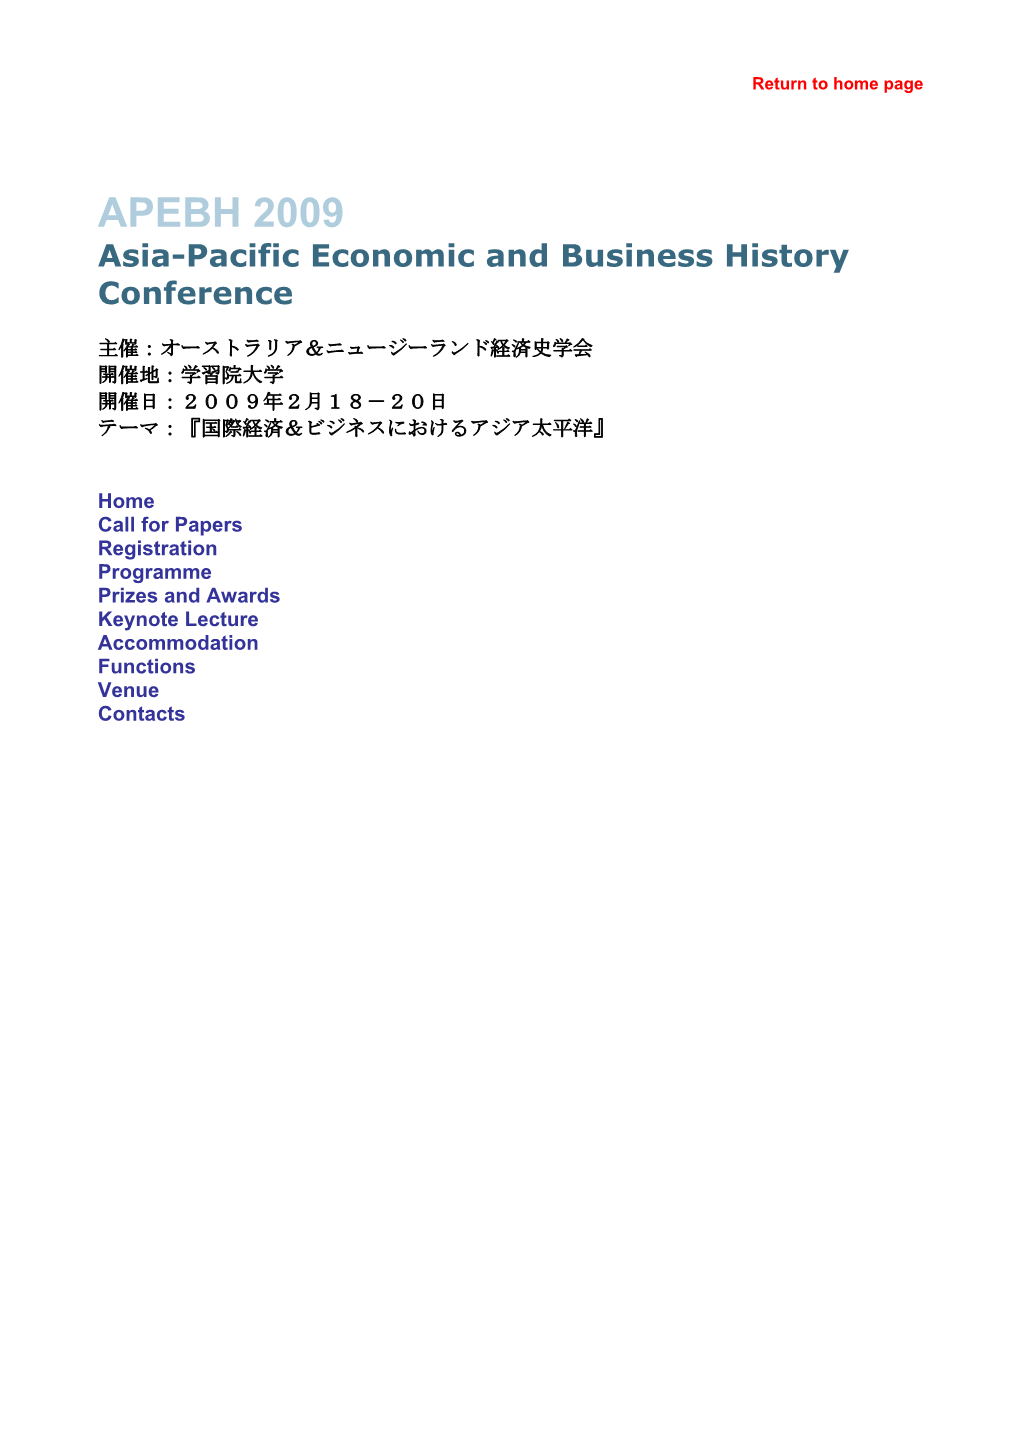 APEBH 2009 Asia-Pacific Economic and Business History Conference